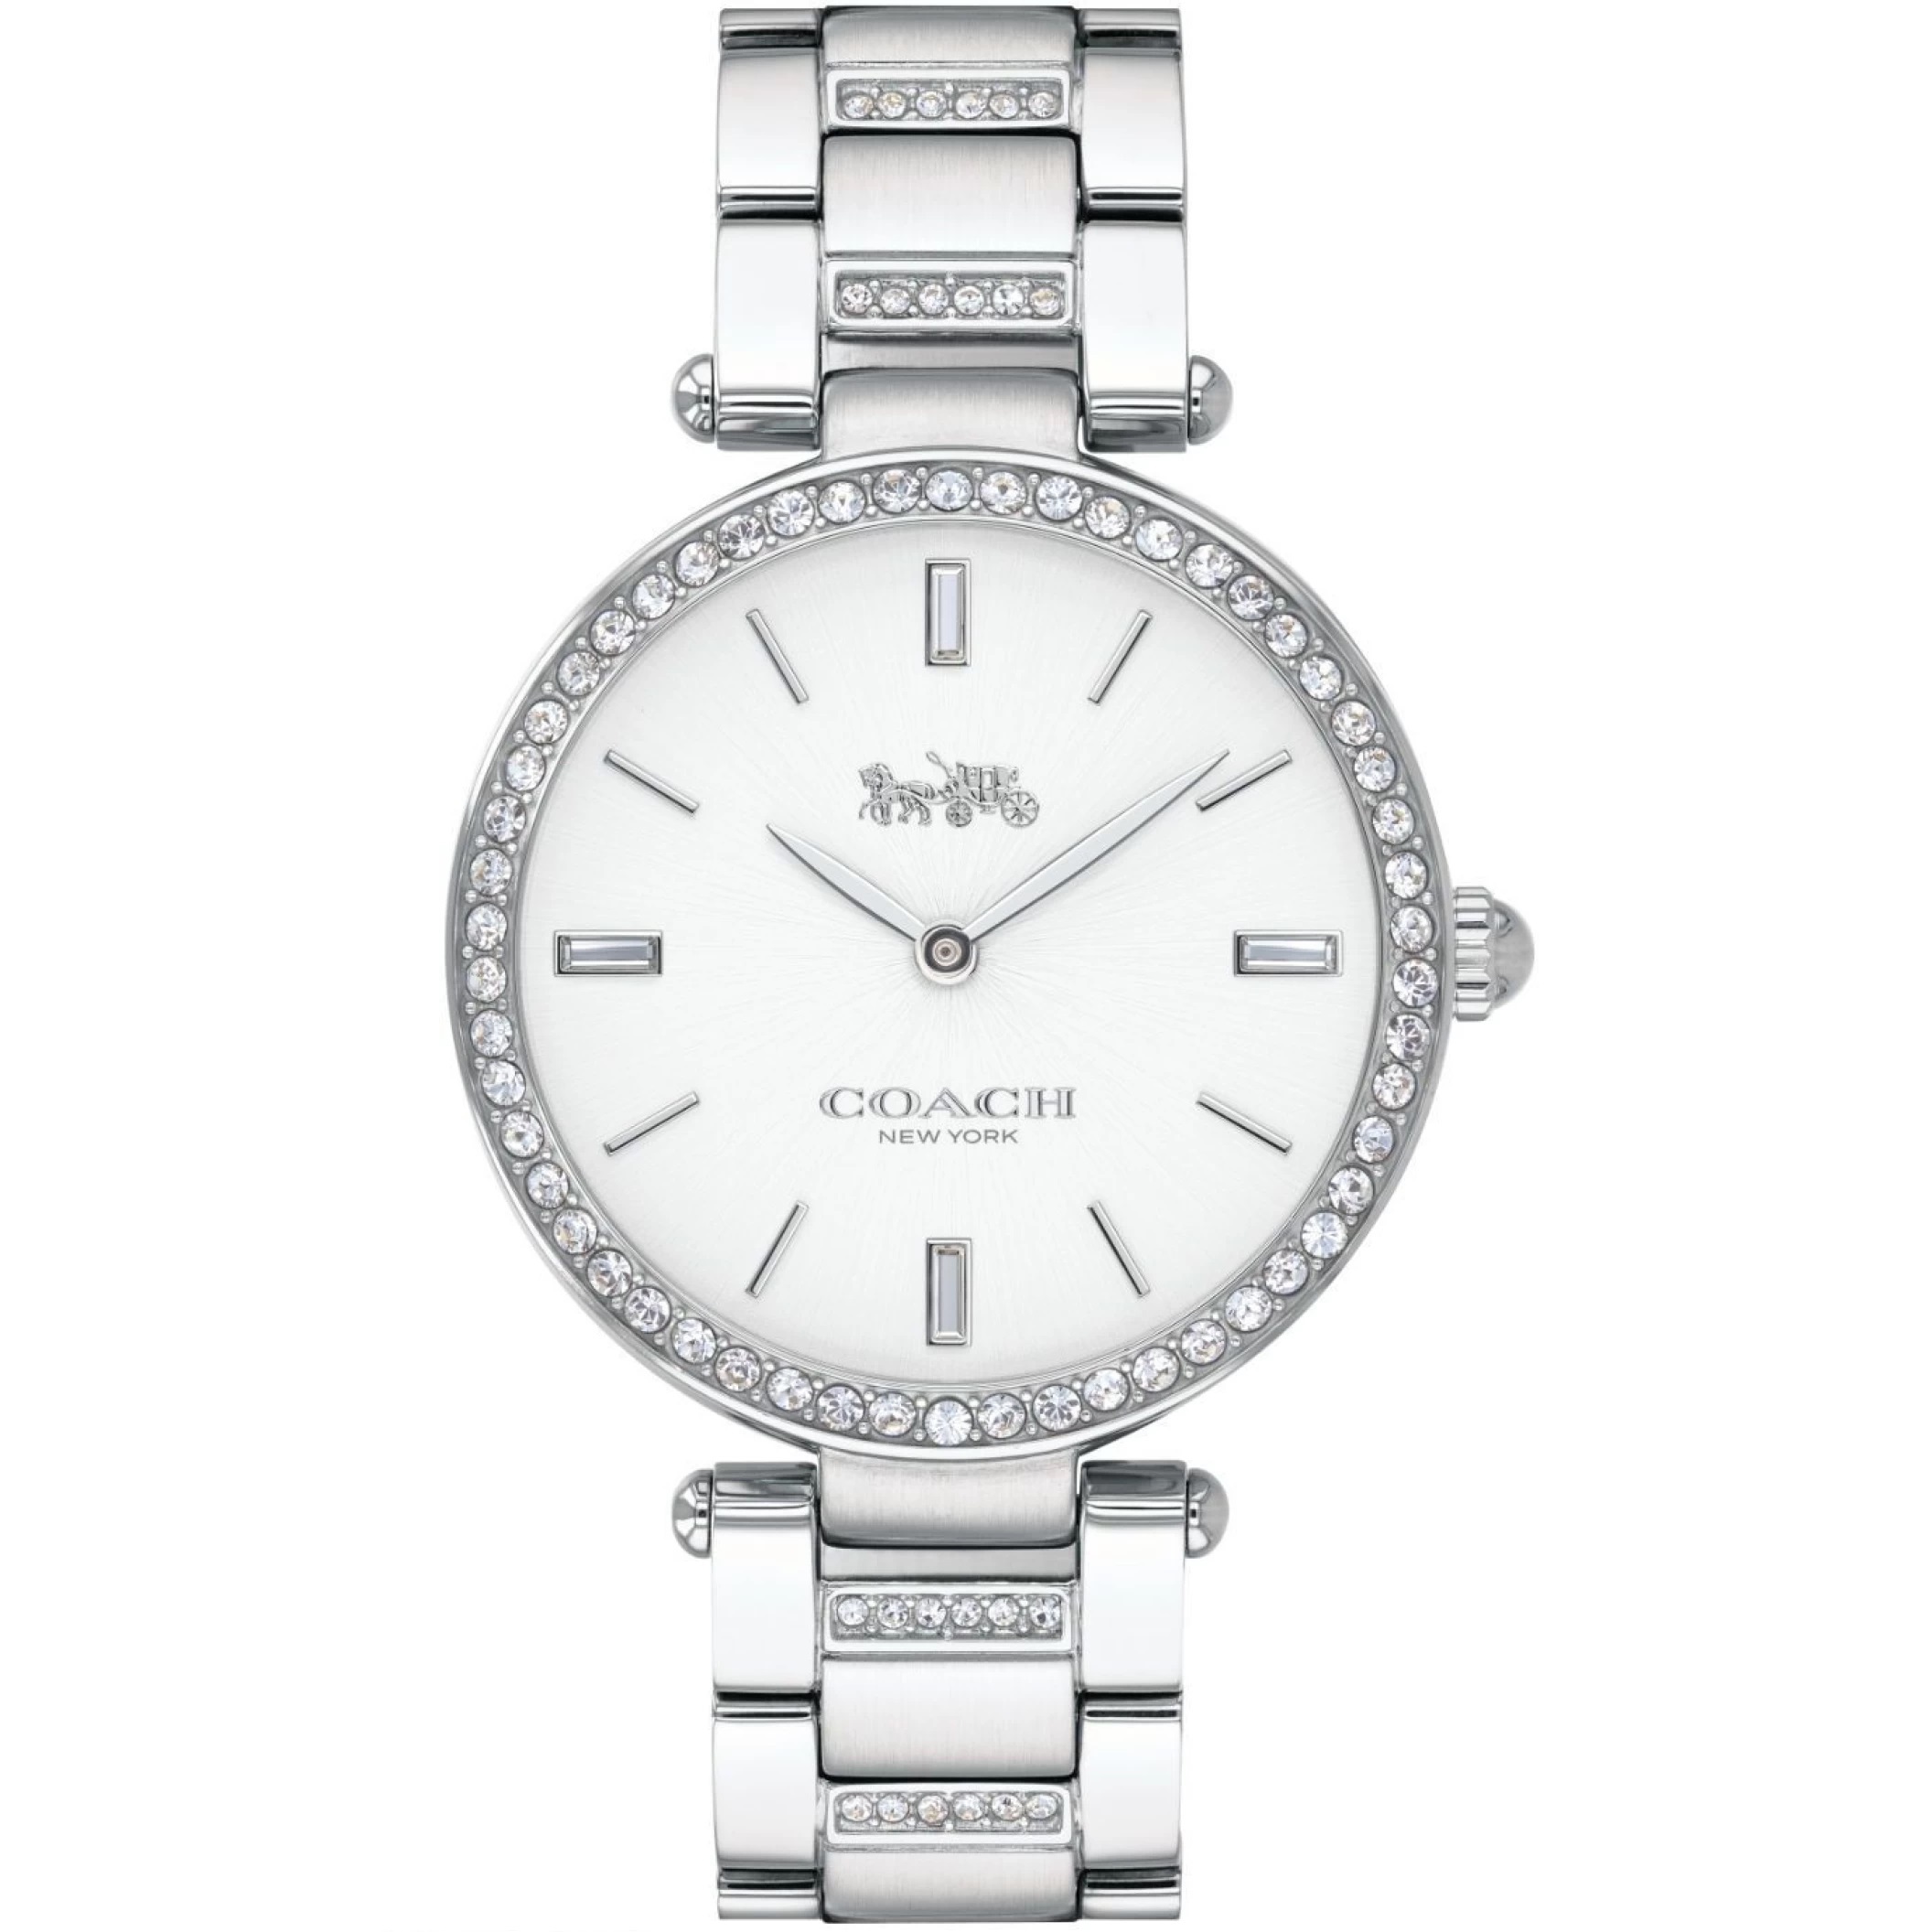  ĐỒNG HỒ COACH DÂY KIM LOẠI PARK QUARTZ WATCH WITH ANALOG DISPLAY AND STAINLESS STEEL STRAP 14503097 4